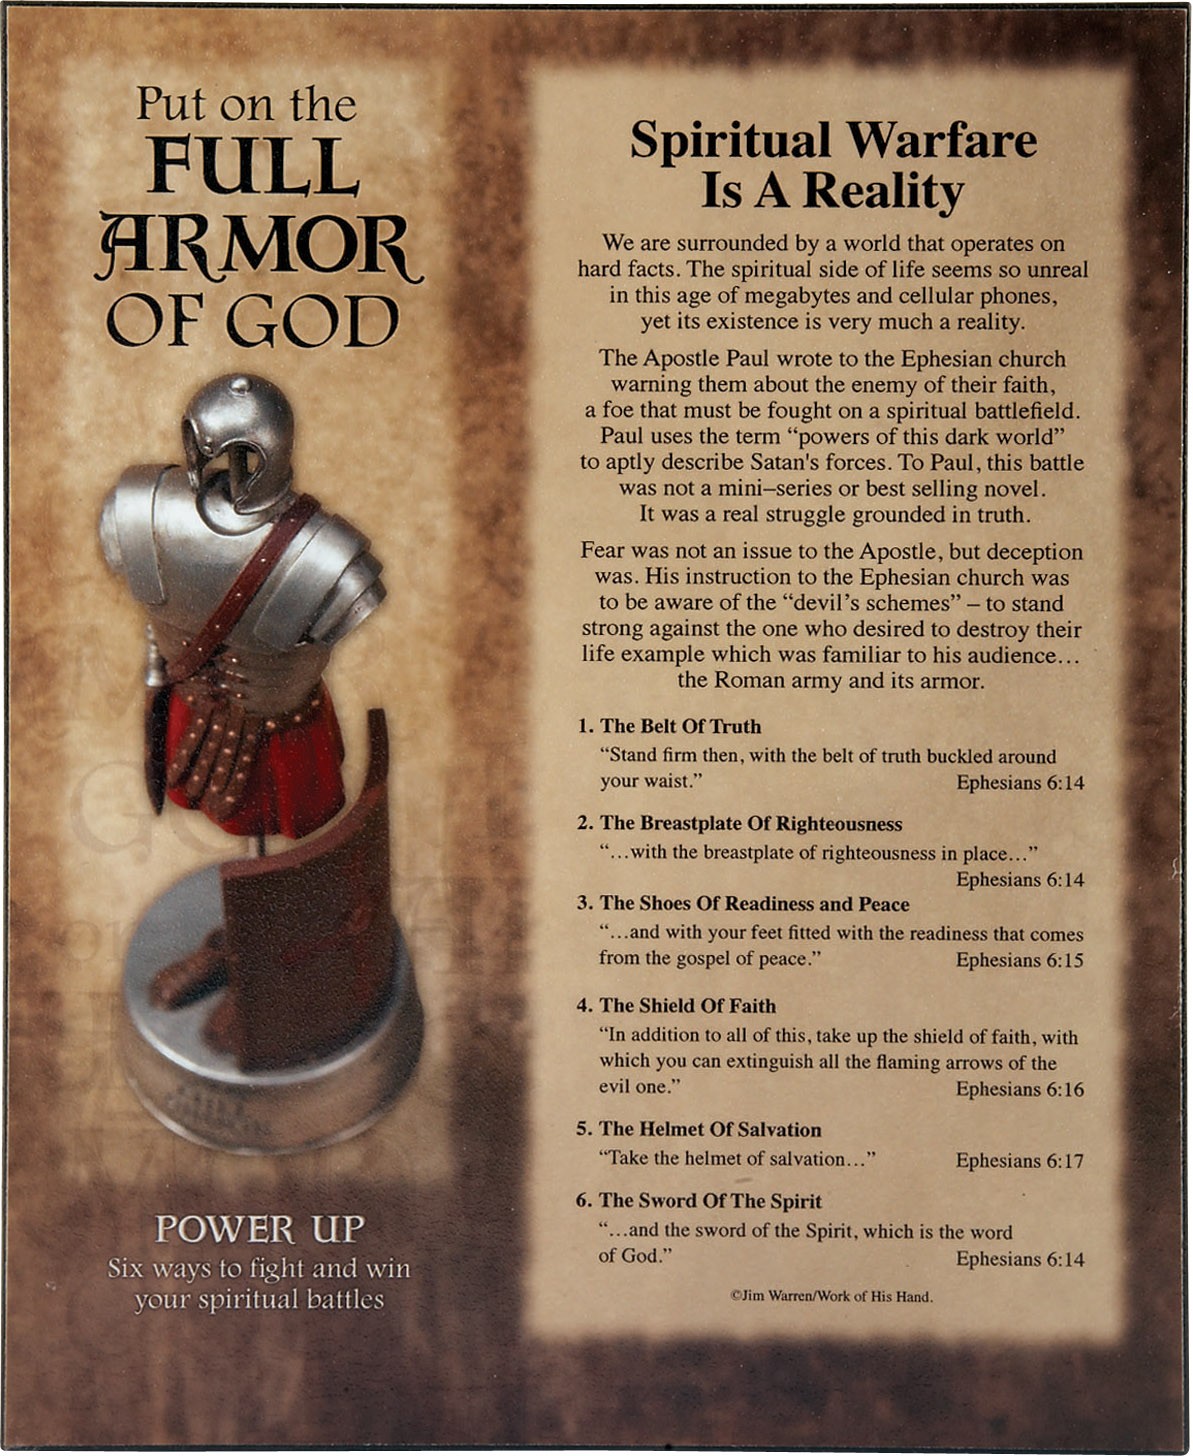 Armor Of God Quotes About. QuotesGram